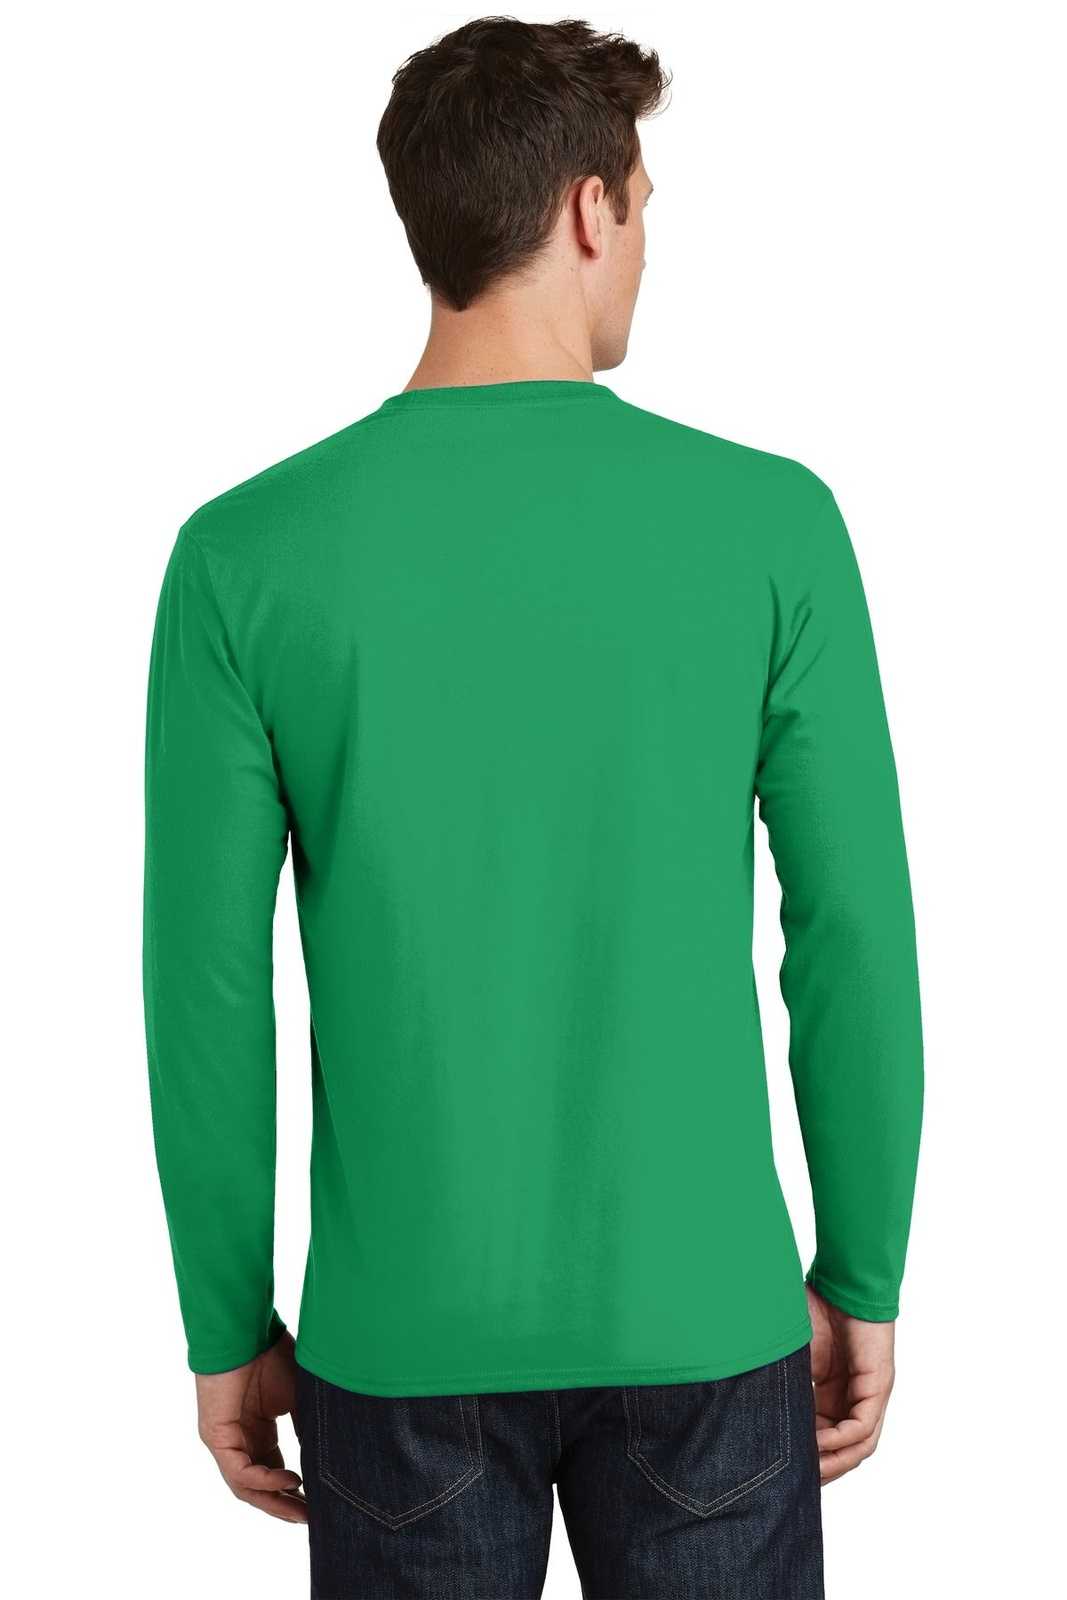 Port &amp; Company PC450LS Long Sleeve Fan Favorite Tee - Athletic Kelly - HIT a Double - 2